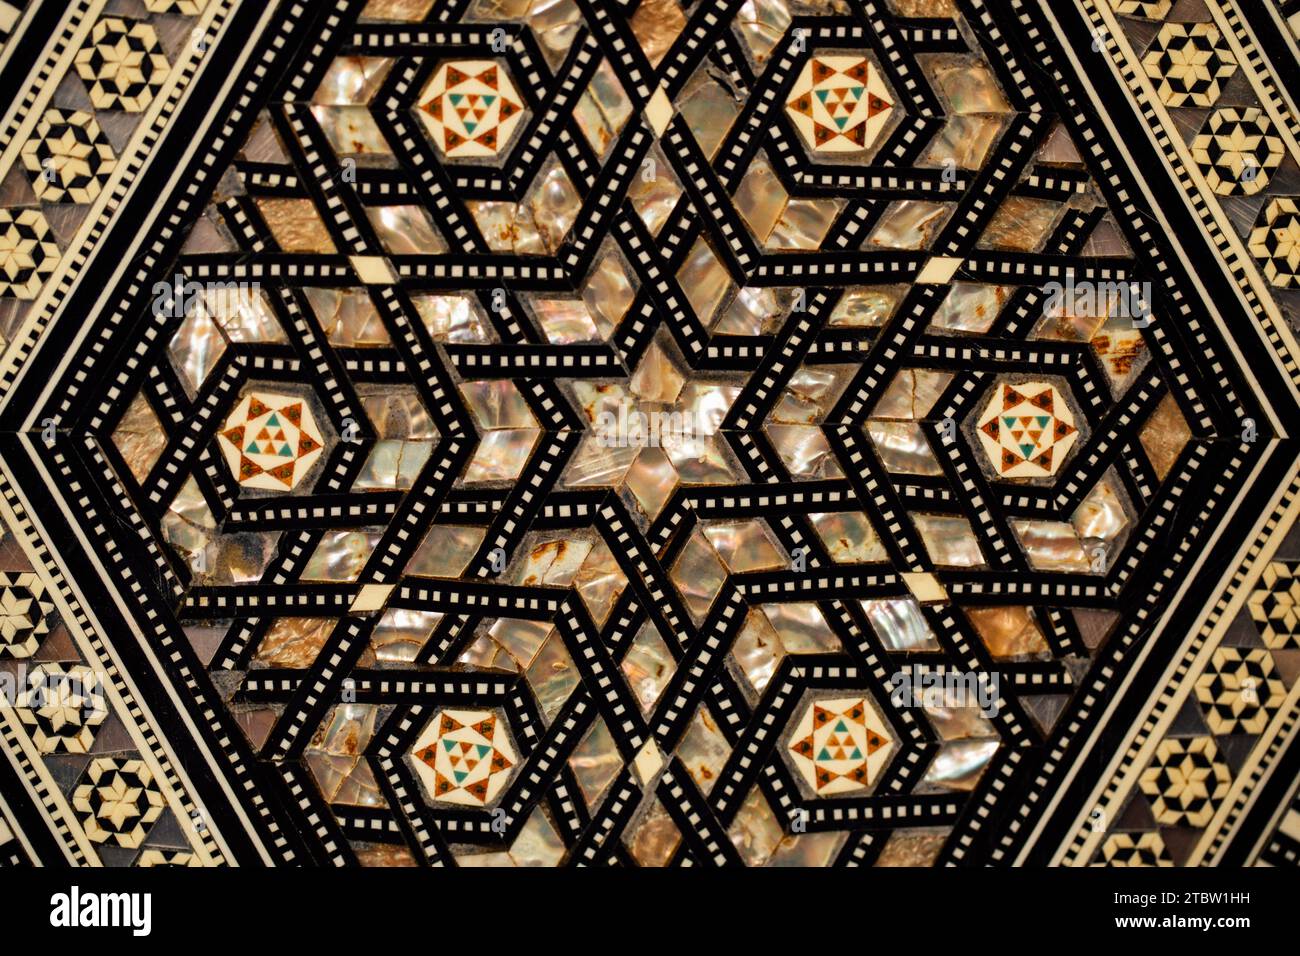 hexagonal middle eastern, moroccan inlaid box design on patterned rug Stock Photo